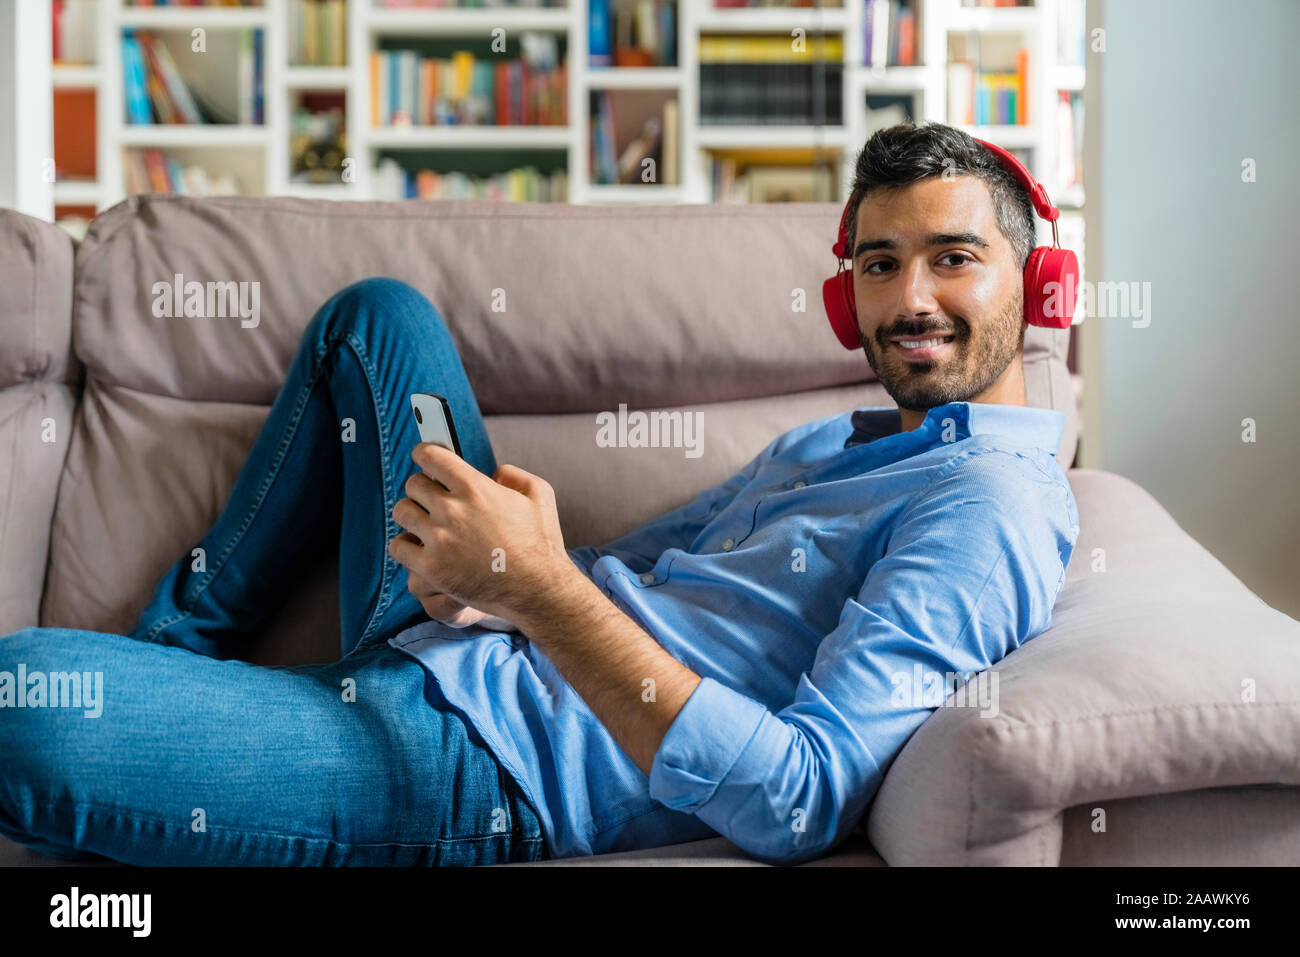 Portrait of smiling young man lying on the couch at home using smartphone and wireless headphones Stock Photo